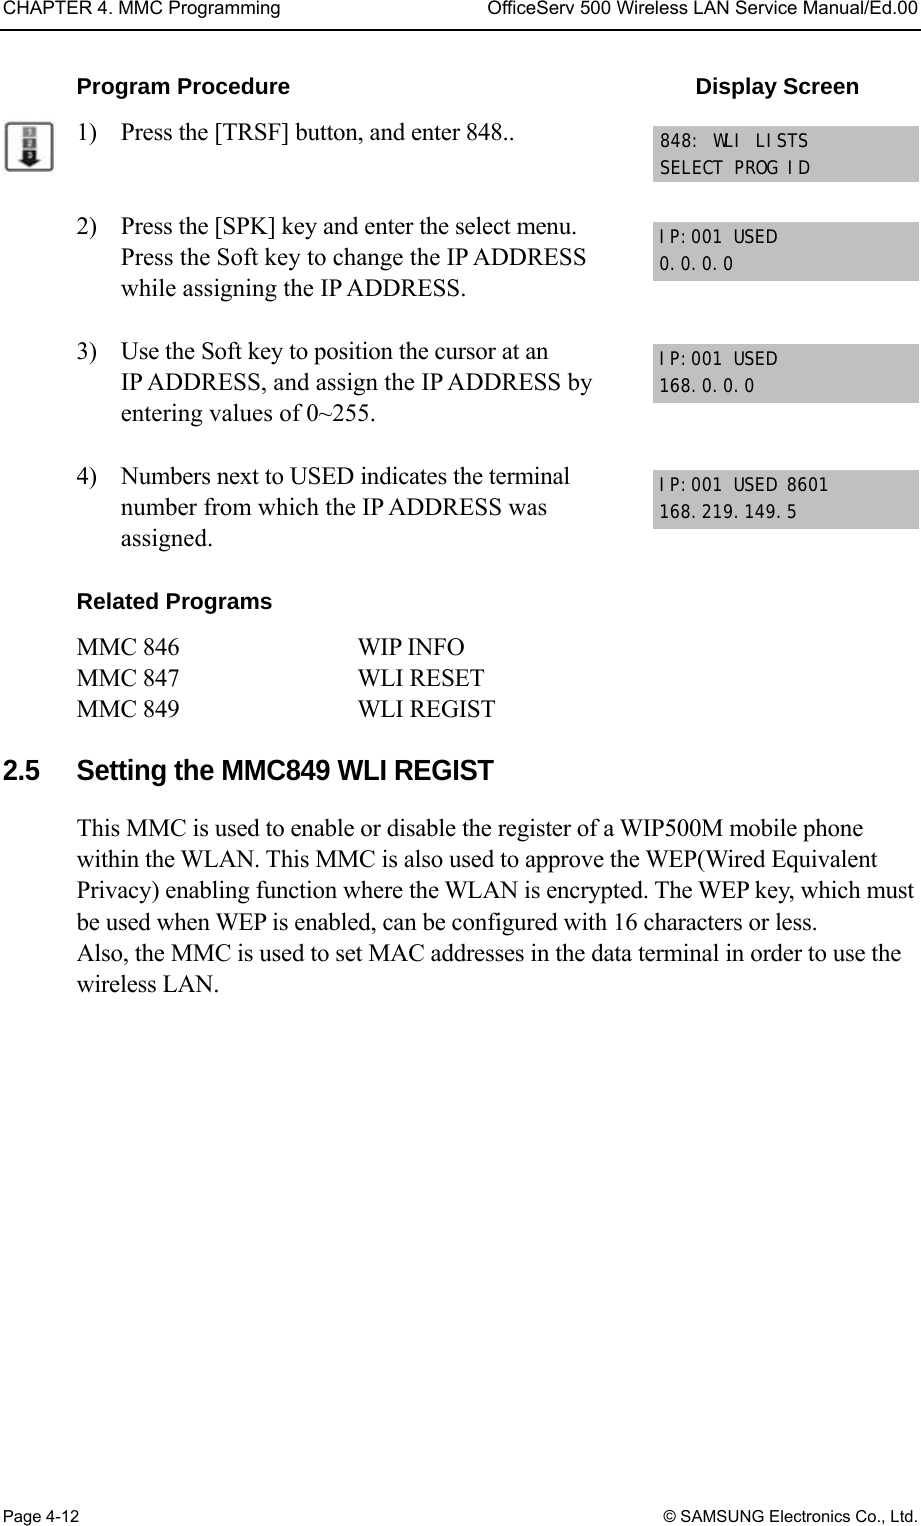 CHAPTER 4. MMC Programming  OfficeServ 500 Wireless LAN Service Manual/Ed.00 Page 4-12 © SAMSUNG Electronics Co., Ltd. Program Procedure                                    Display Screen 1)    Press the [TRSF] button, and enter 848..   2)    Press the [SPK] key and enter the select menu. Press the Soft key to change the IP ADDRESS while assigning the IP ADDRESS.  3)    Use the Soft key to position the cursor at an IP ADDRESS, and assign the IP ADDRESS by entering values of 0~255.  4)    Numbers next to USED indicates the terminal number from which the IP ADDRESS was assigned.  Related Programs MMC 846         WIP INFO    MMC 847     WLI RESET   MMC 849     WLI REGIST  2.5  Setting the MMC849 WLI REGIST This MMC is used to enable or disable the register of a WIP500M mobile phone within the WLAN. This MMC is also used to approve the WEP(Wired Equivalent Privacy) enabling function where the WLAN is encrypted. The WEP key, which must be used when WEP is enabled, can be configured with 16 characters or less. Also, the MMC is used to set MAC addresses in the data terminal in order to use the wireless LAN.  IP:001 USED 0.0.0.0 848: WLI LISTS SELECT PROG ID IP:001 USED 168.0.0.0 IP:001 USED 8601 168.219.149.5 